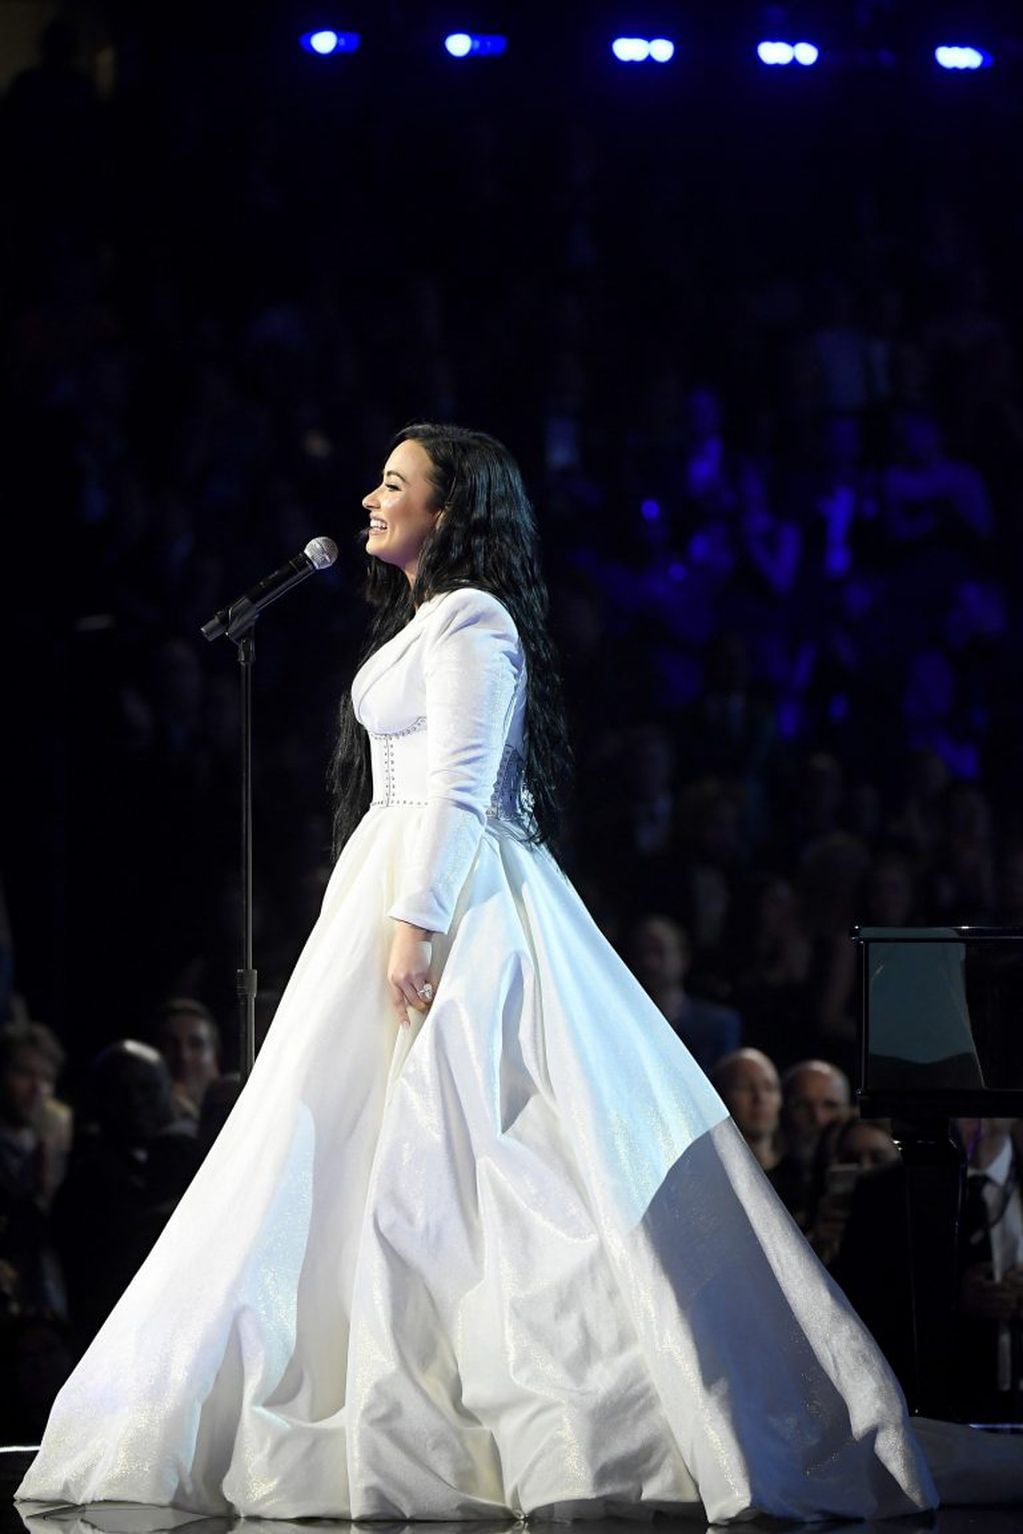 LOS ANGELES, CALIFORNIA - JANUARY 26: Demi Lovato performs onstage during the 62nd Annual GRAMMY Awards at Staples Center on January 26, 2020 in Los Angeles, California.   Kevork Djansezian/Getty Images/AFP
== FOR NEWSPAPERS, INTERNET, TELCOS & TELEVISION USE ONLY ==